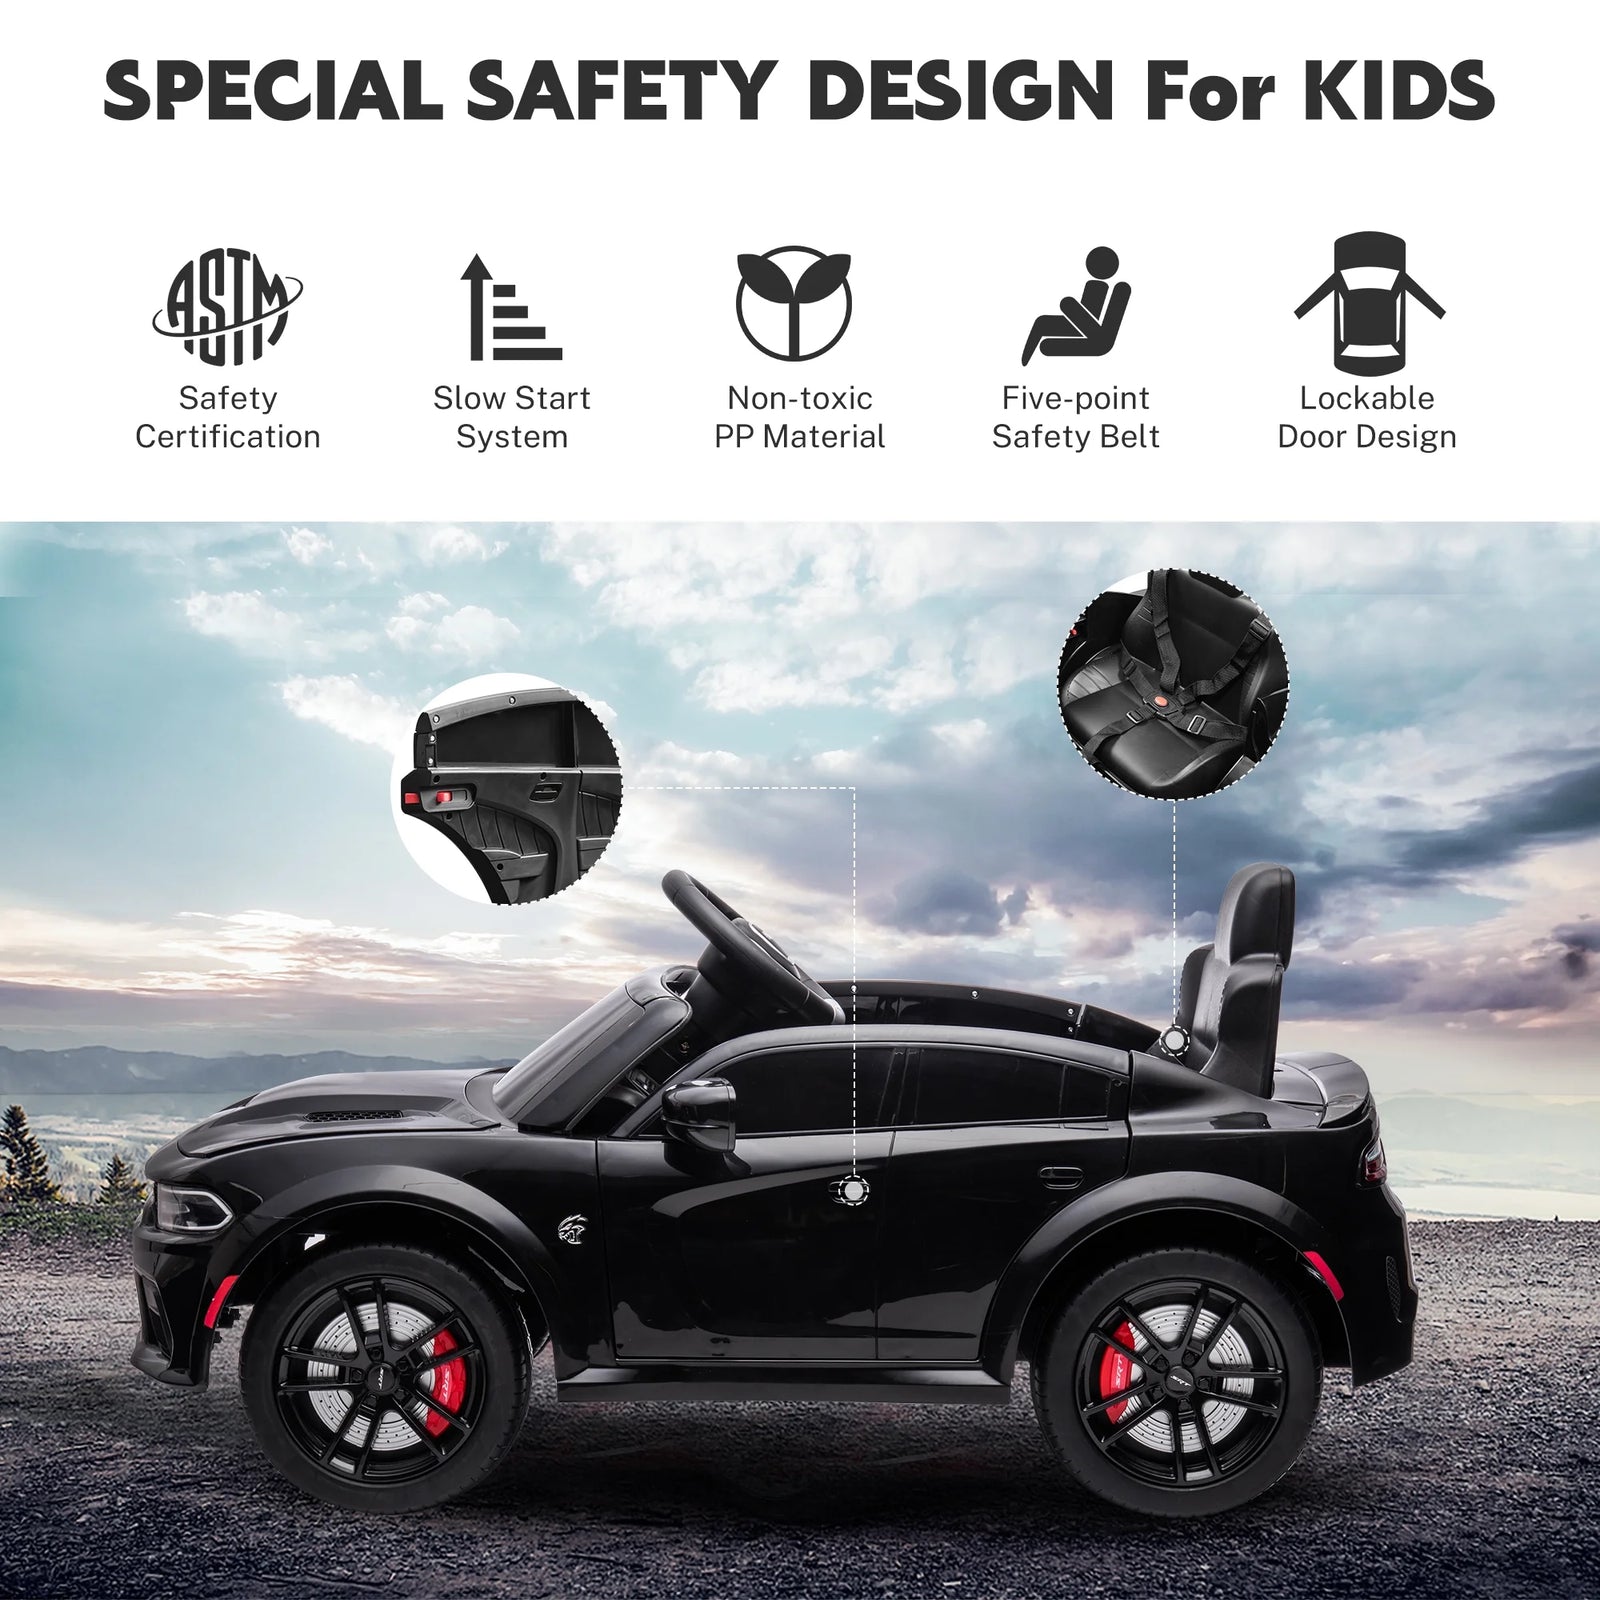 Dodge Electric Ride on Cars for Kids, 12 V Licensed Dodge Charger SRT Powered Ride on Toys Cars with Parent Remote Control, Electric Car for Girls 3-5 W/Music Player/Led Headlights/Safety Belt, Black